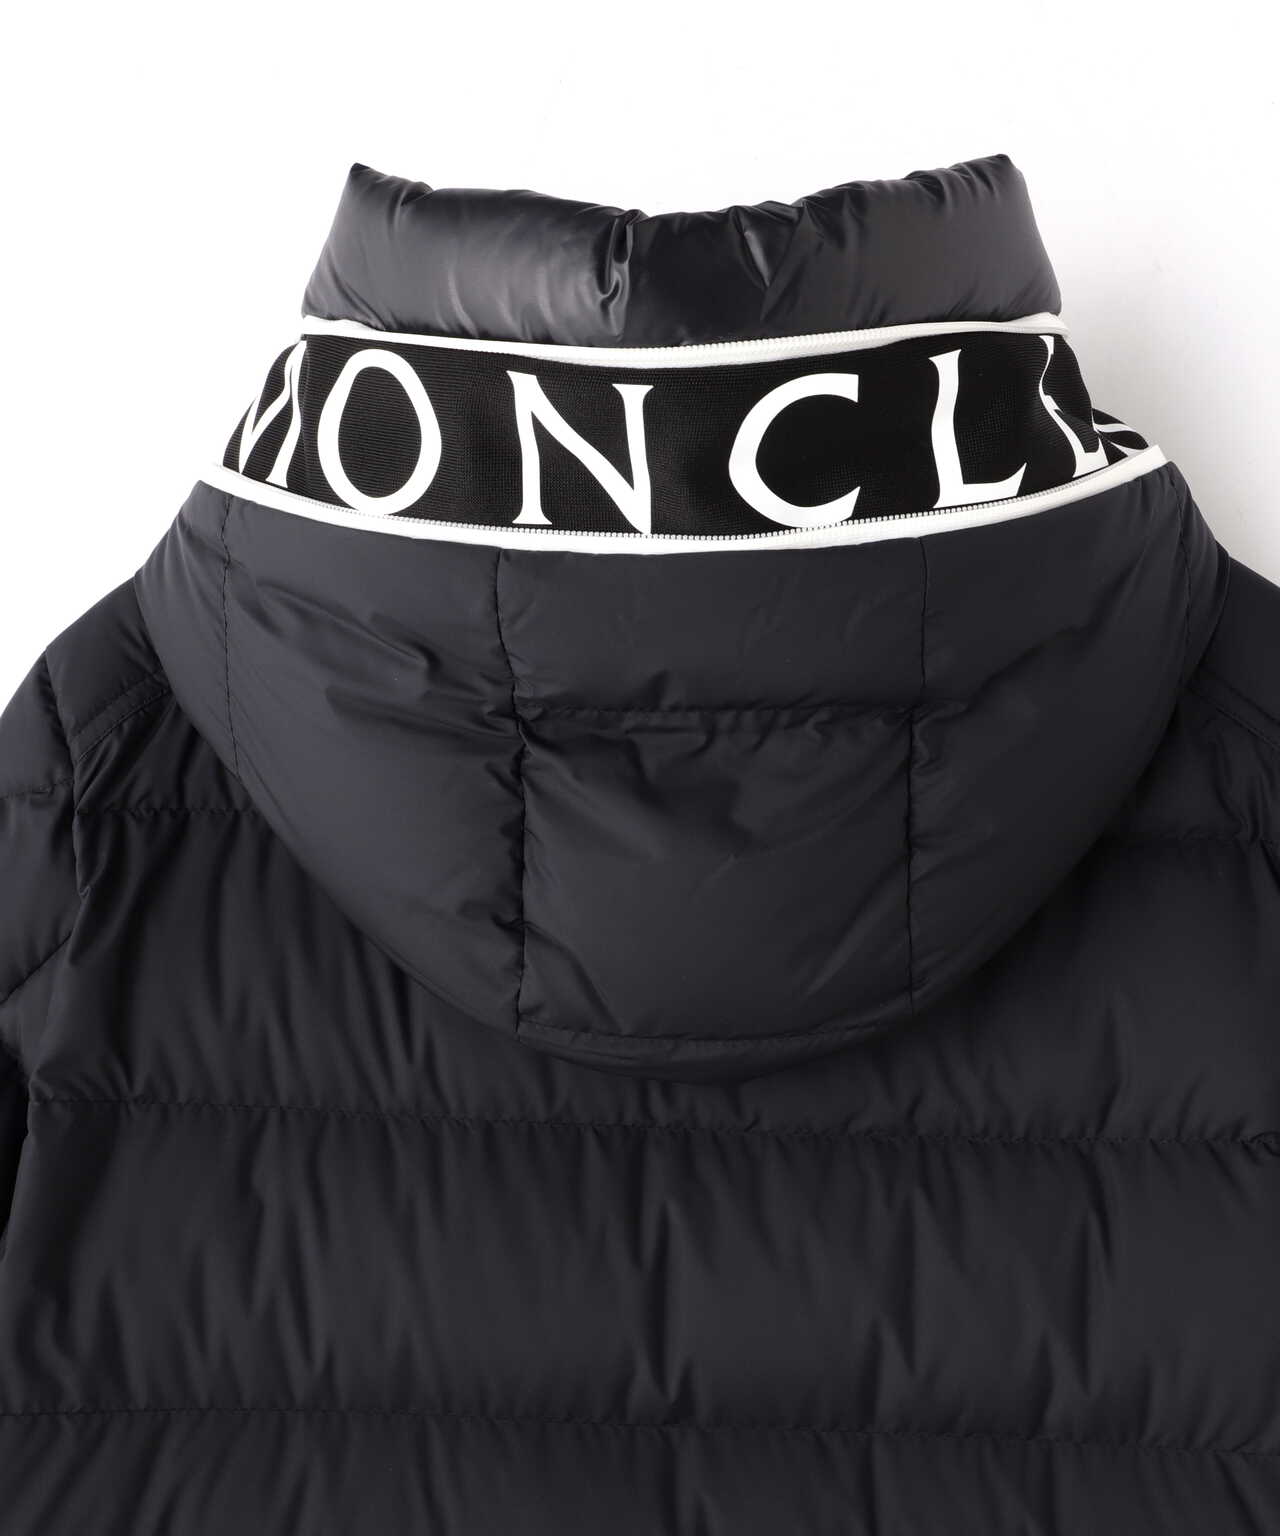 MONCLER/モンクレール/CARDERE JACKET/ダウンジャケット | LHP ...